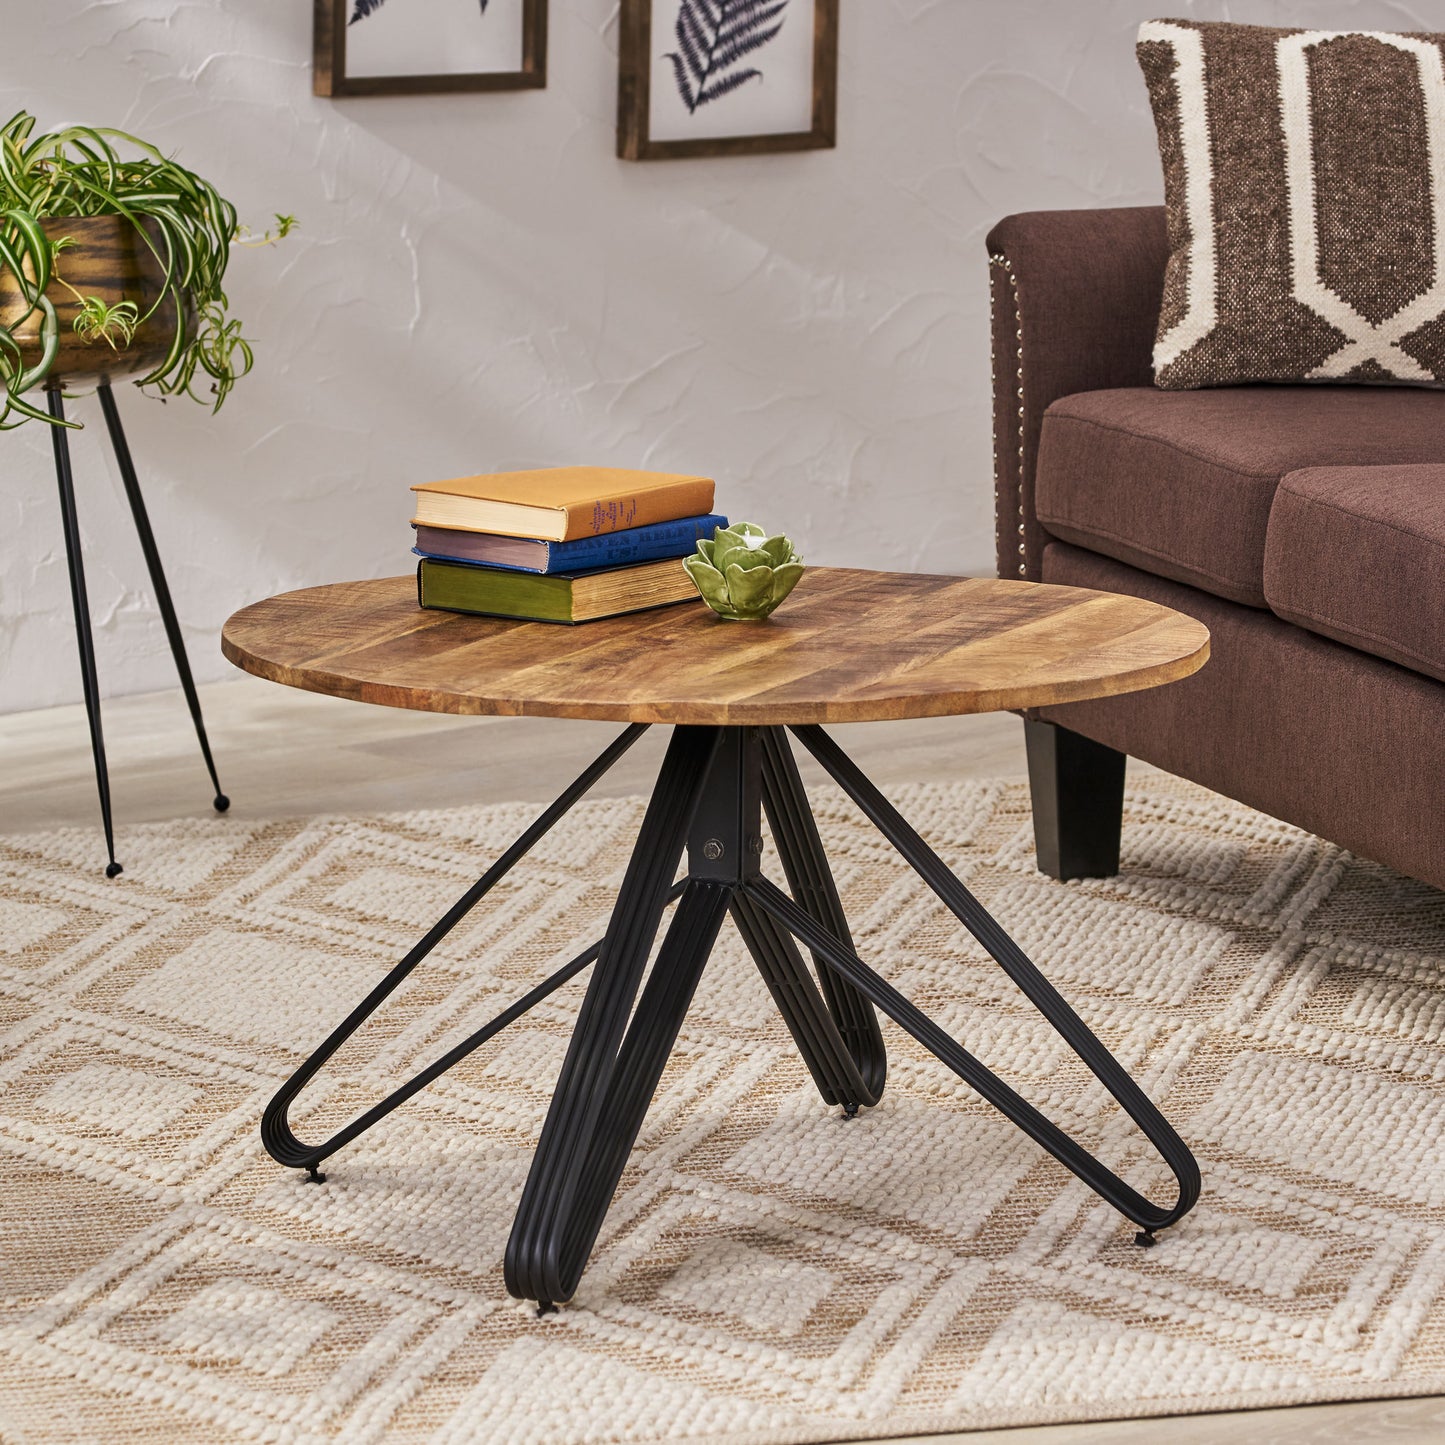 Peniel Modern Industrial Handcrafted Mango Wood Coffee Table, Natural and Black